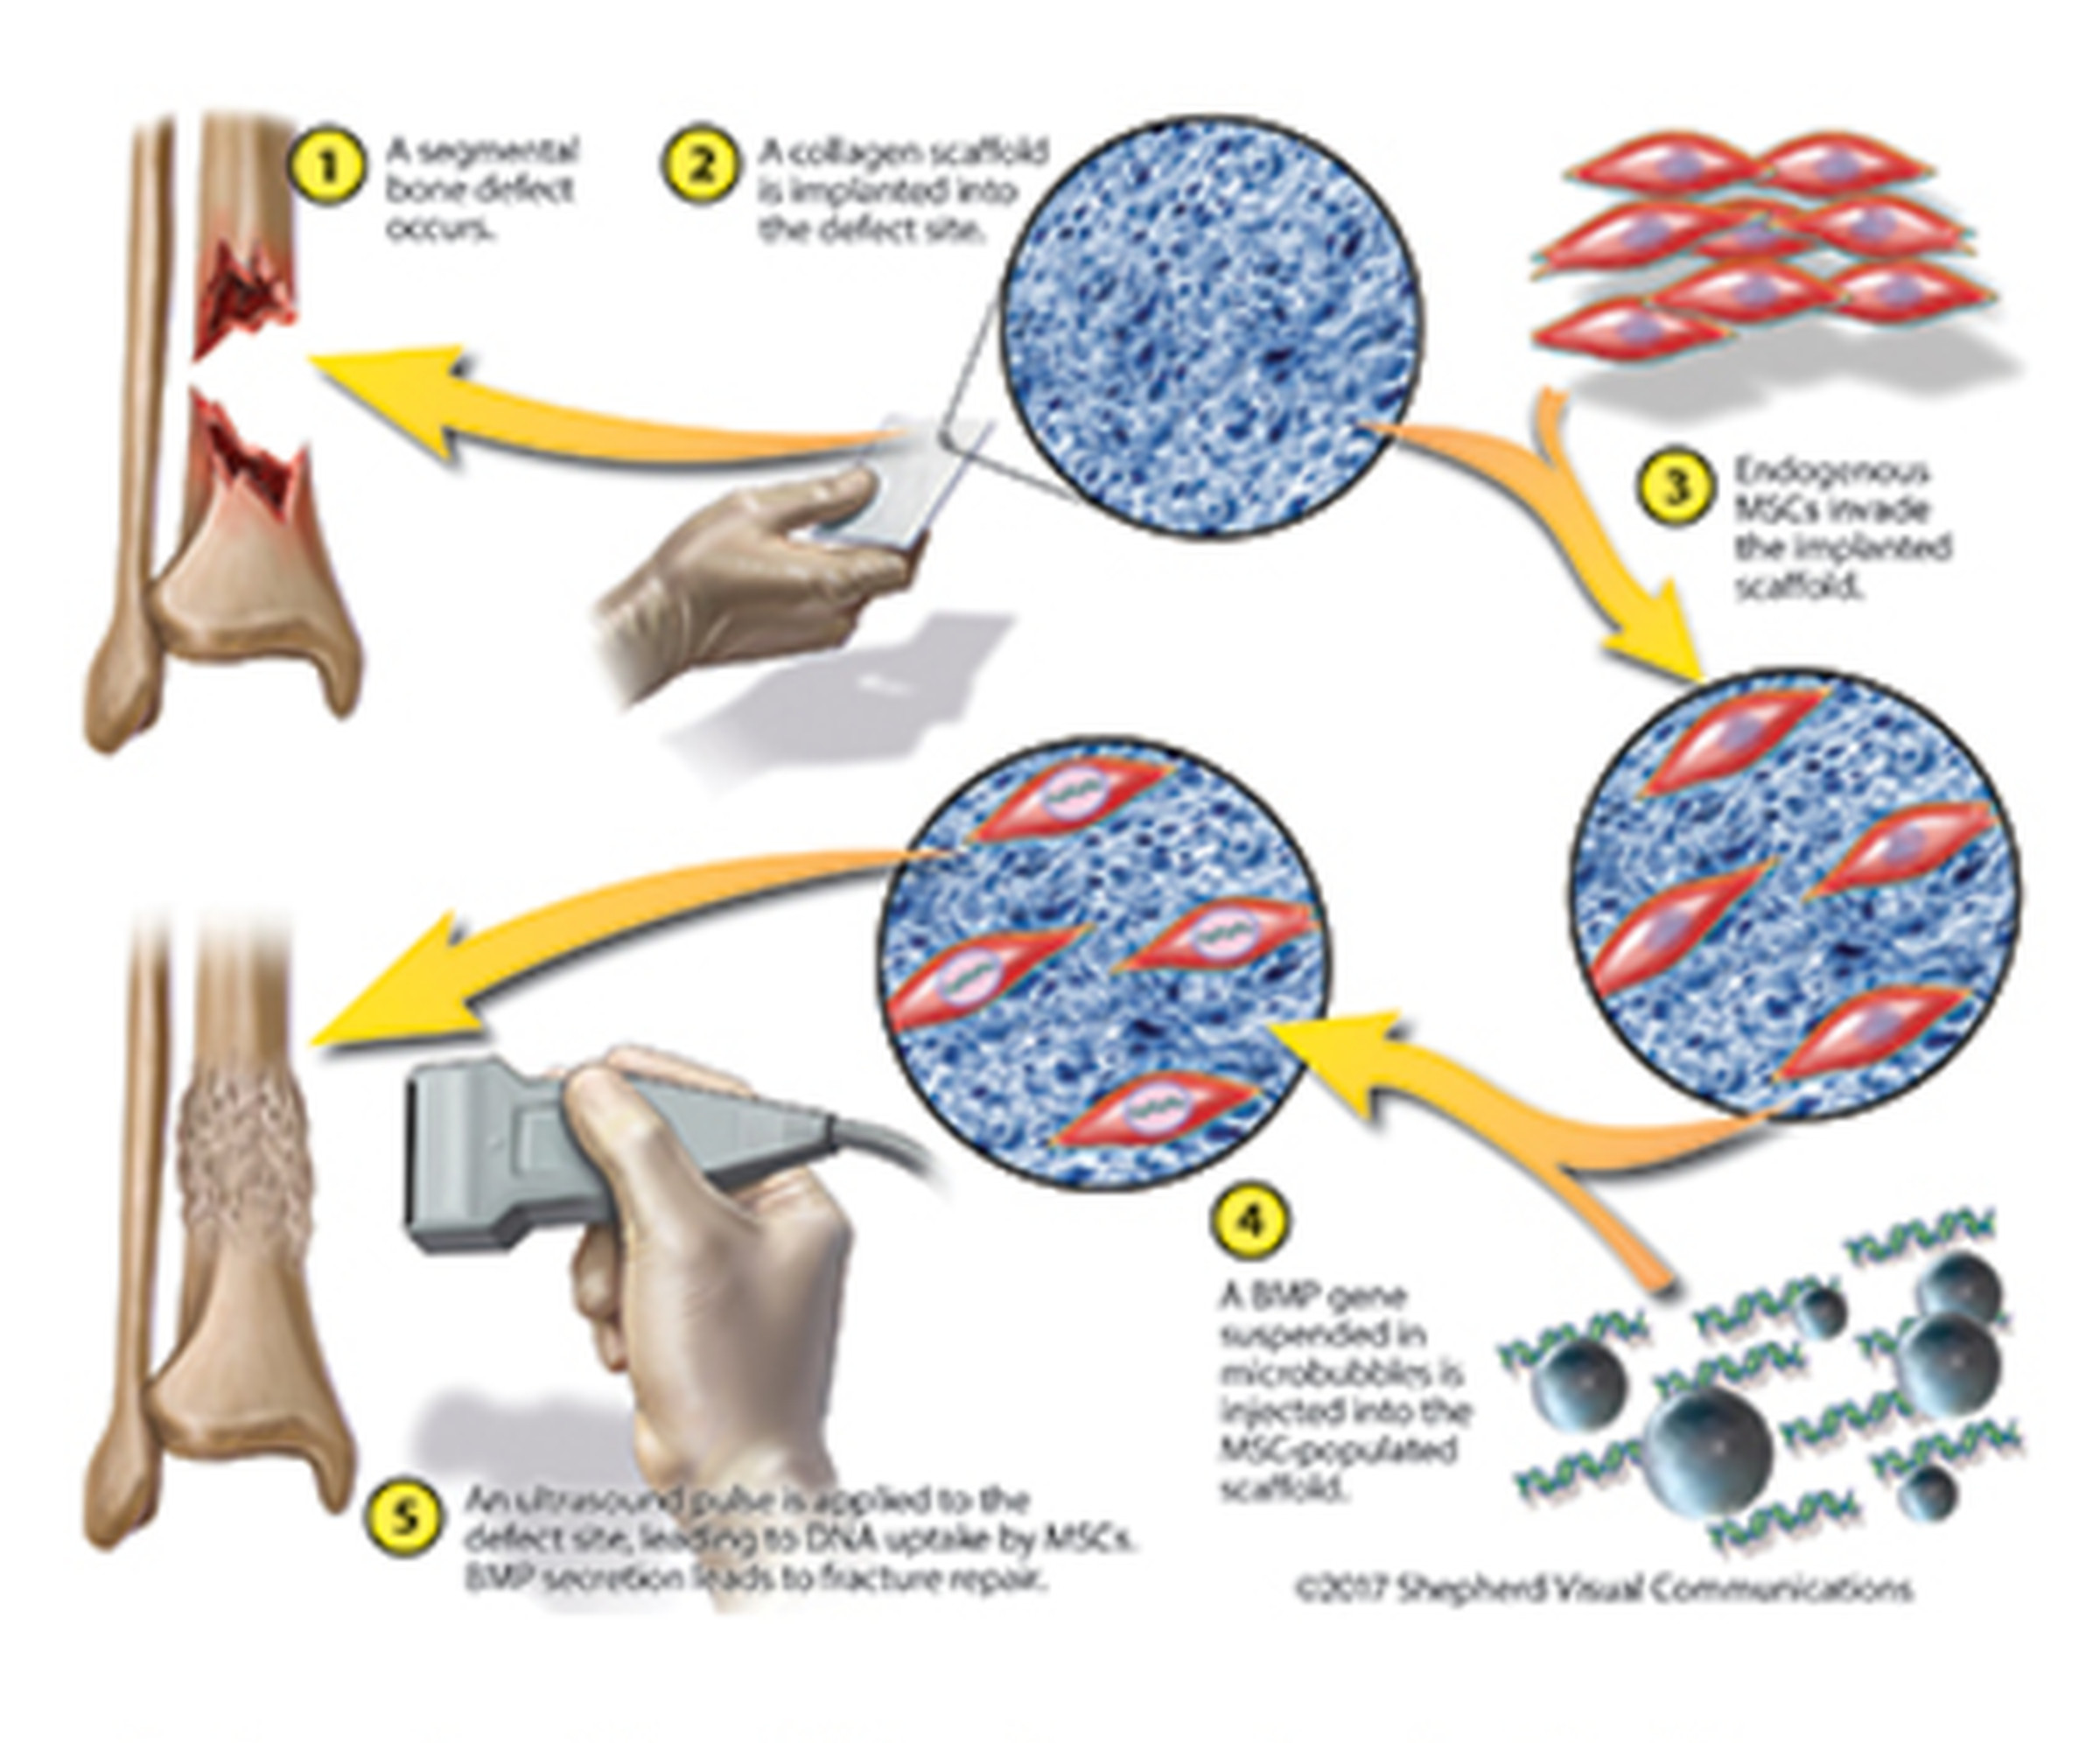 Cartoon schematic explaining ultrasound delivery method for gene therapy